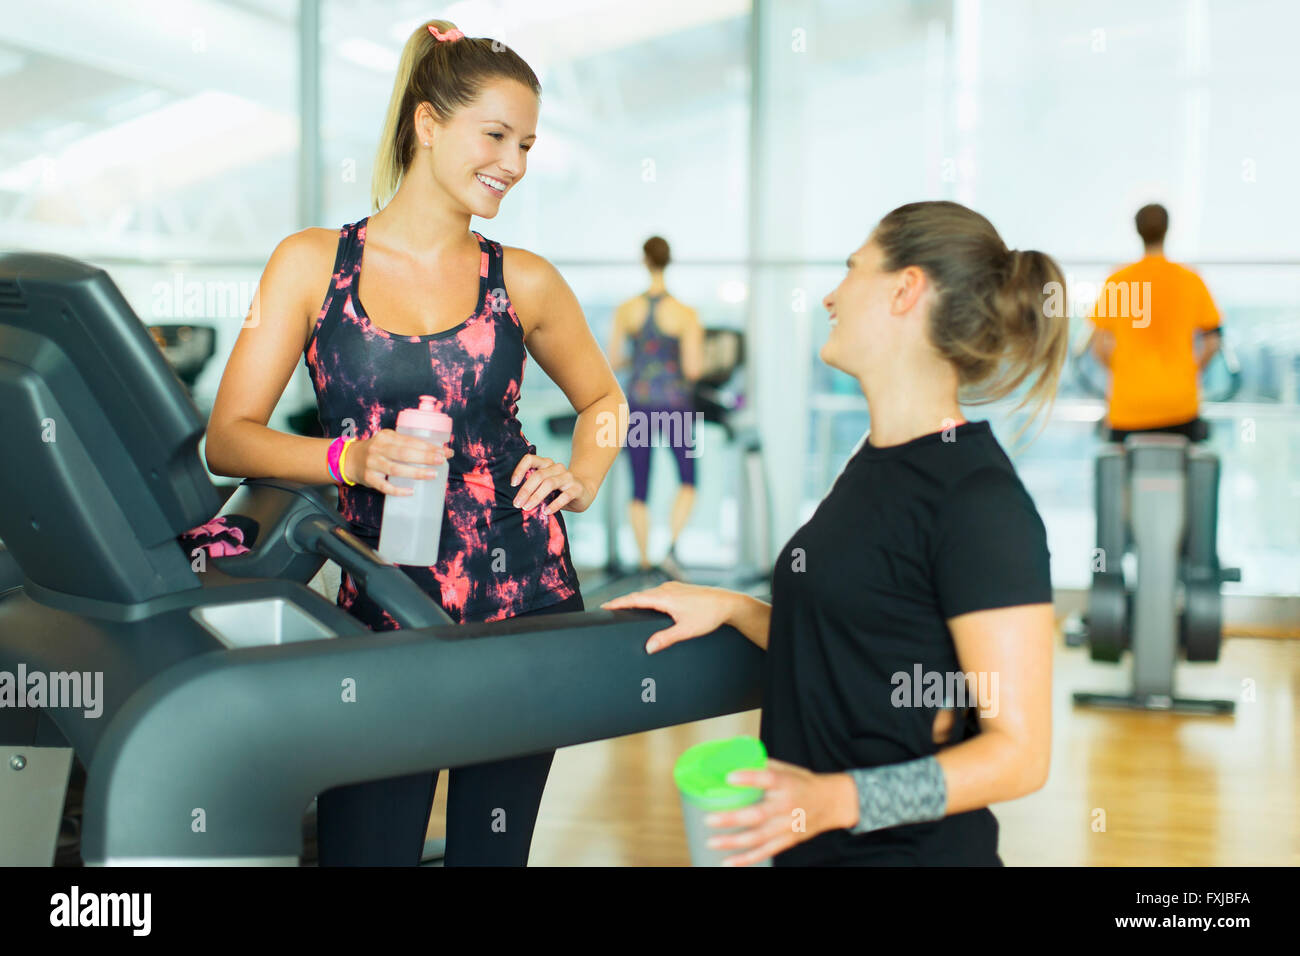 Smiling women resting and talking at treadmill in gym Stock Photo